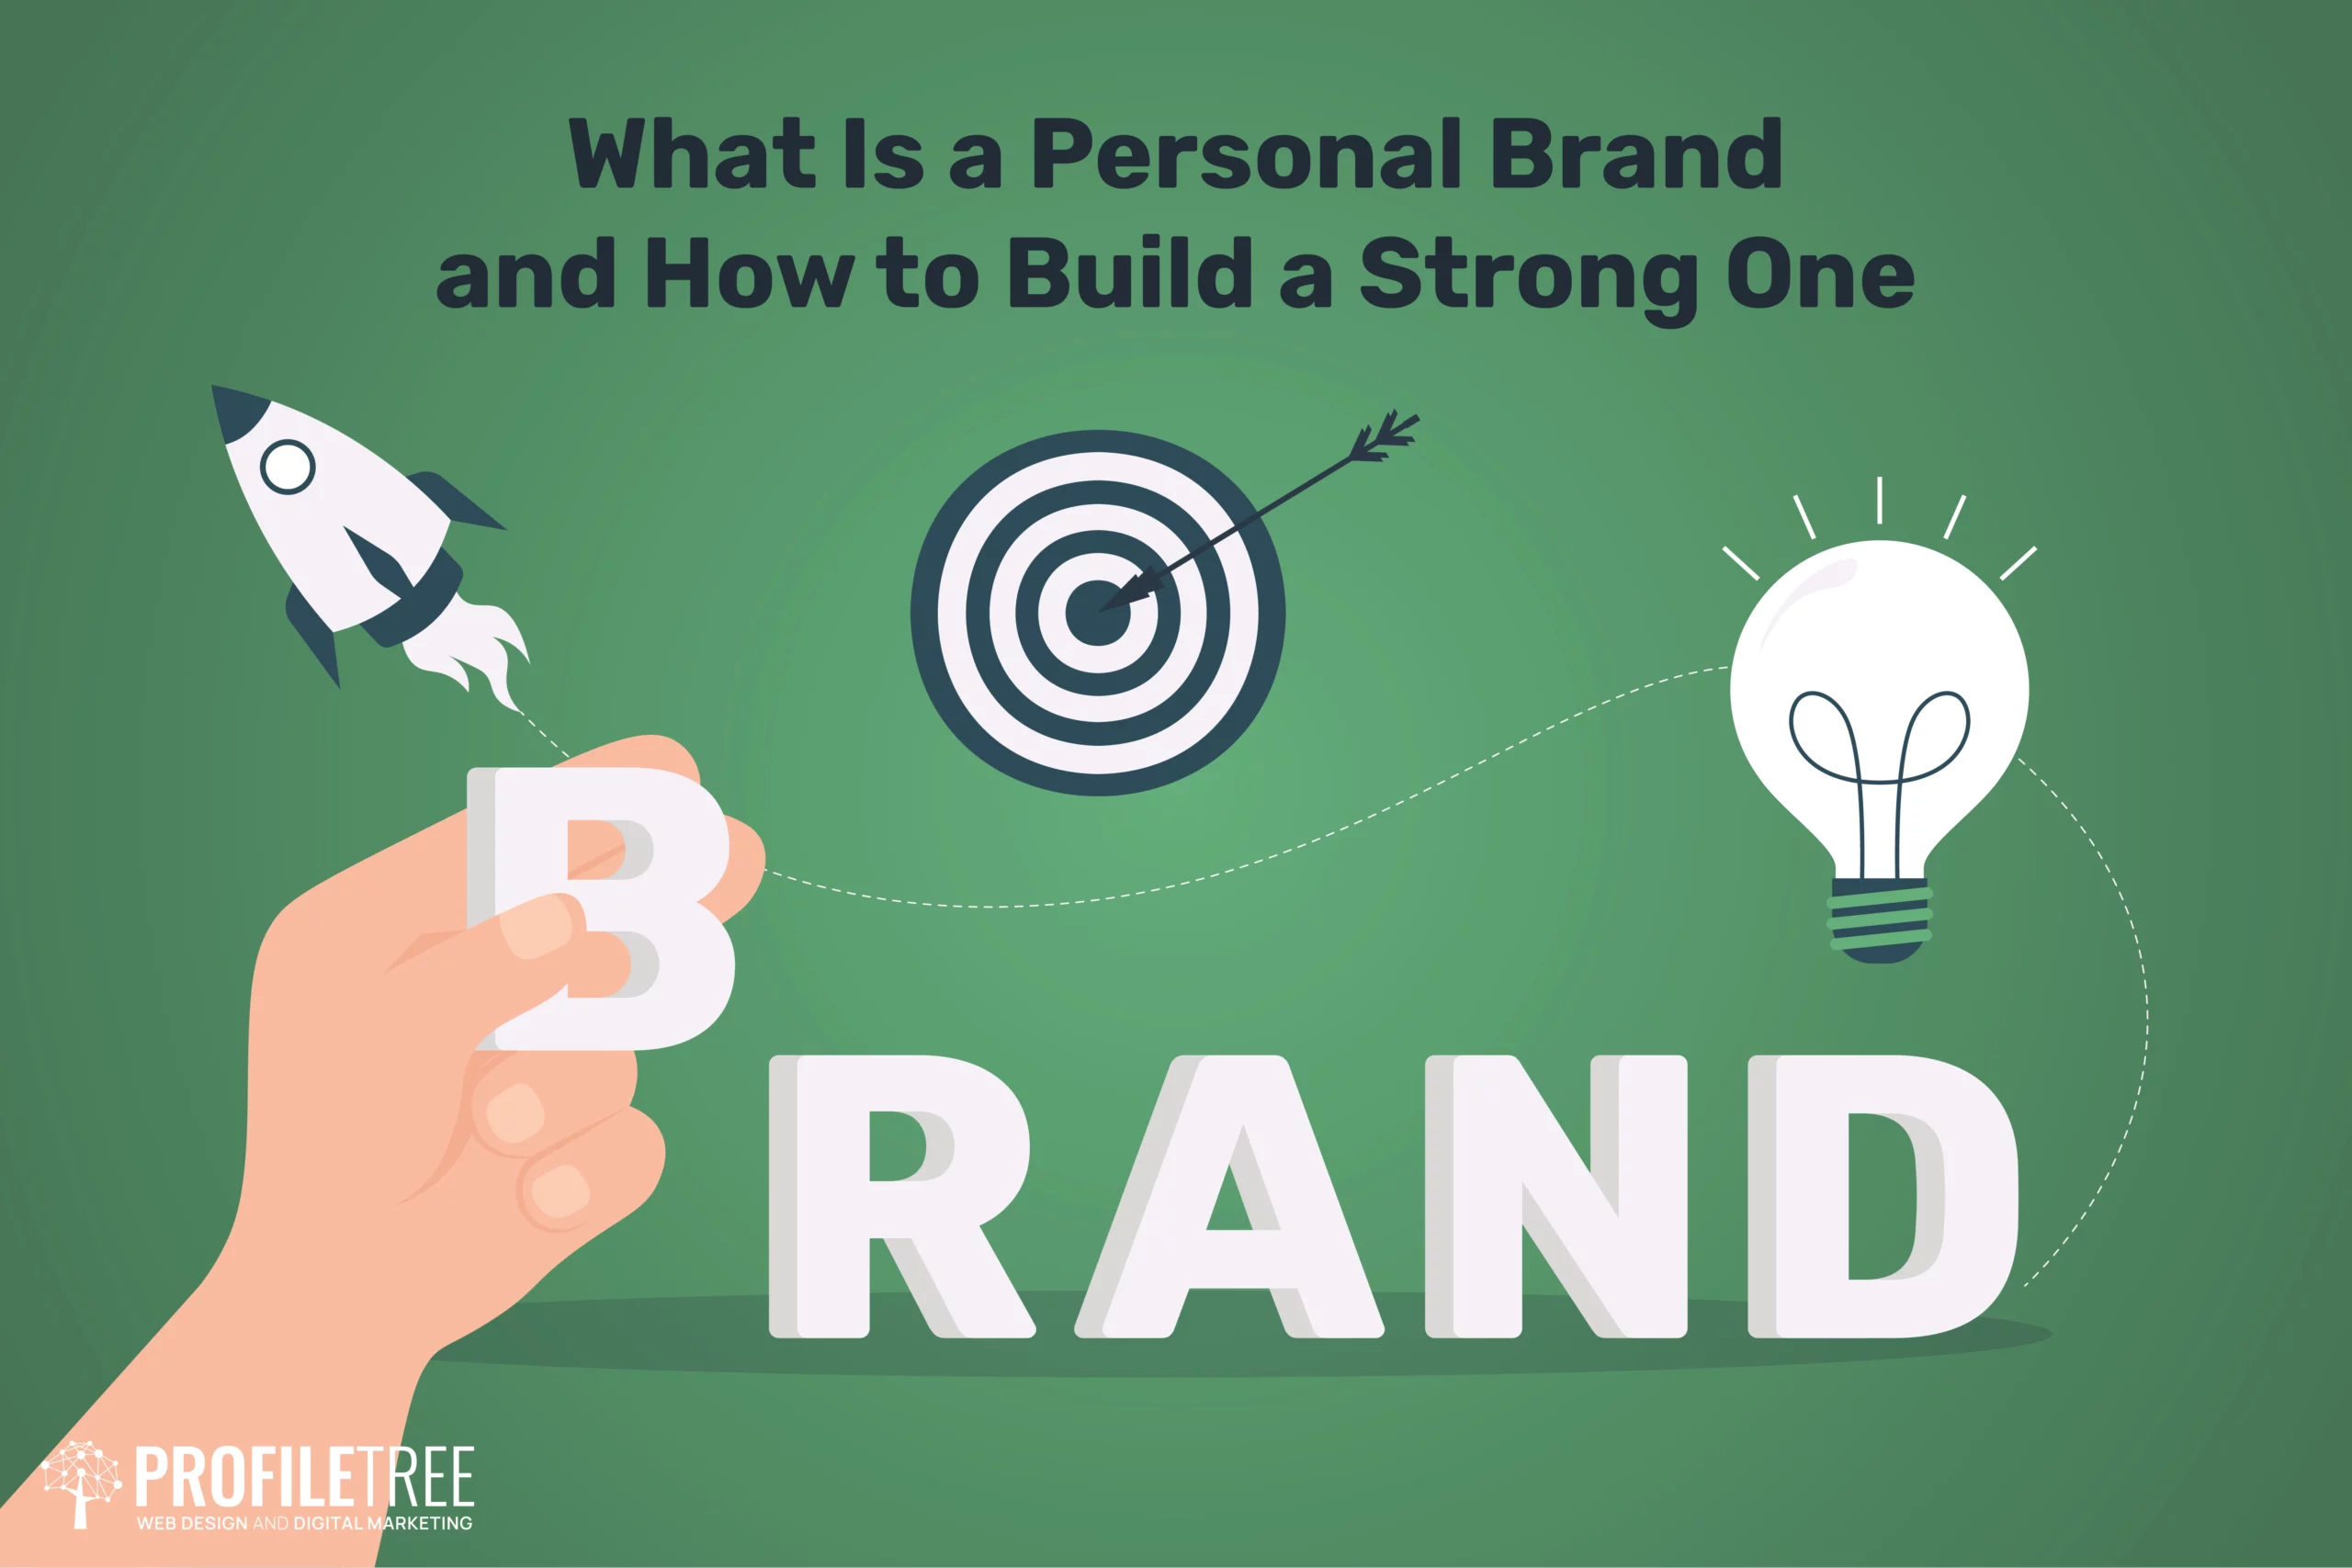 What Is a Personal Brand and How to Build a Strong One